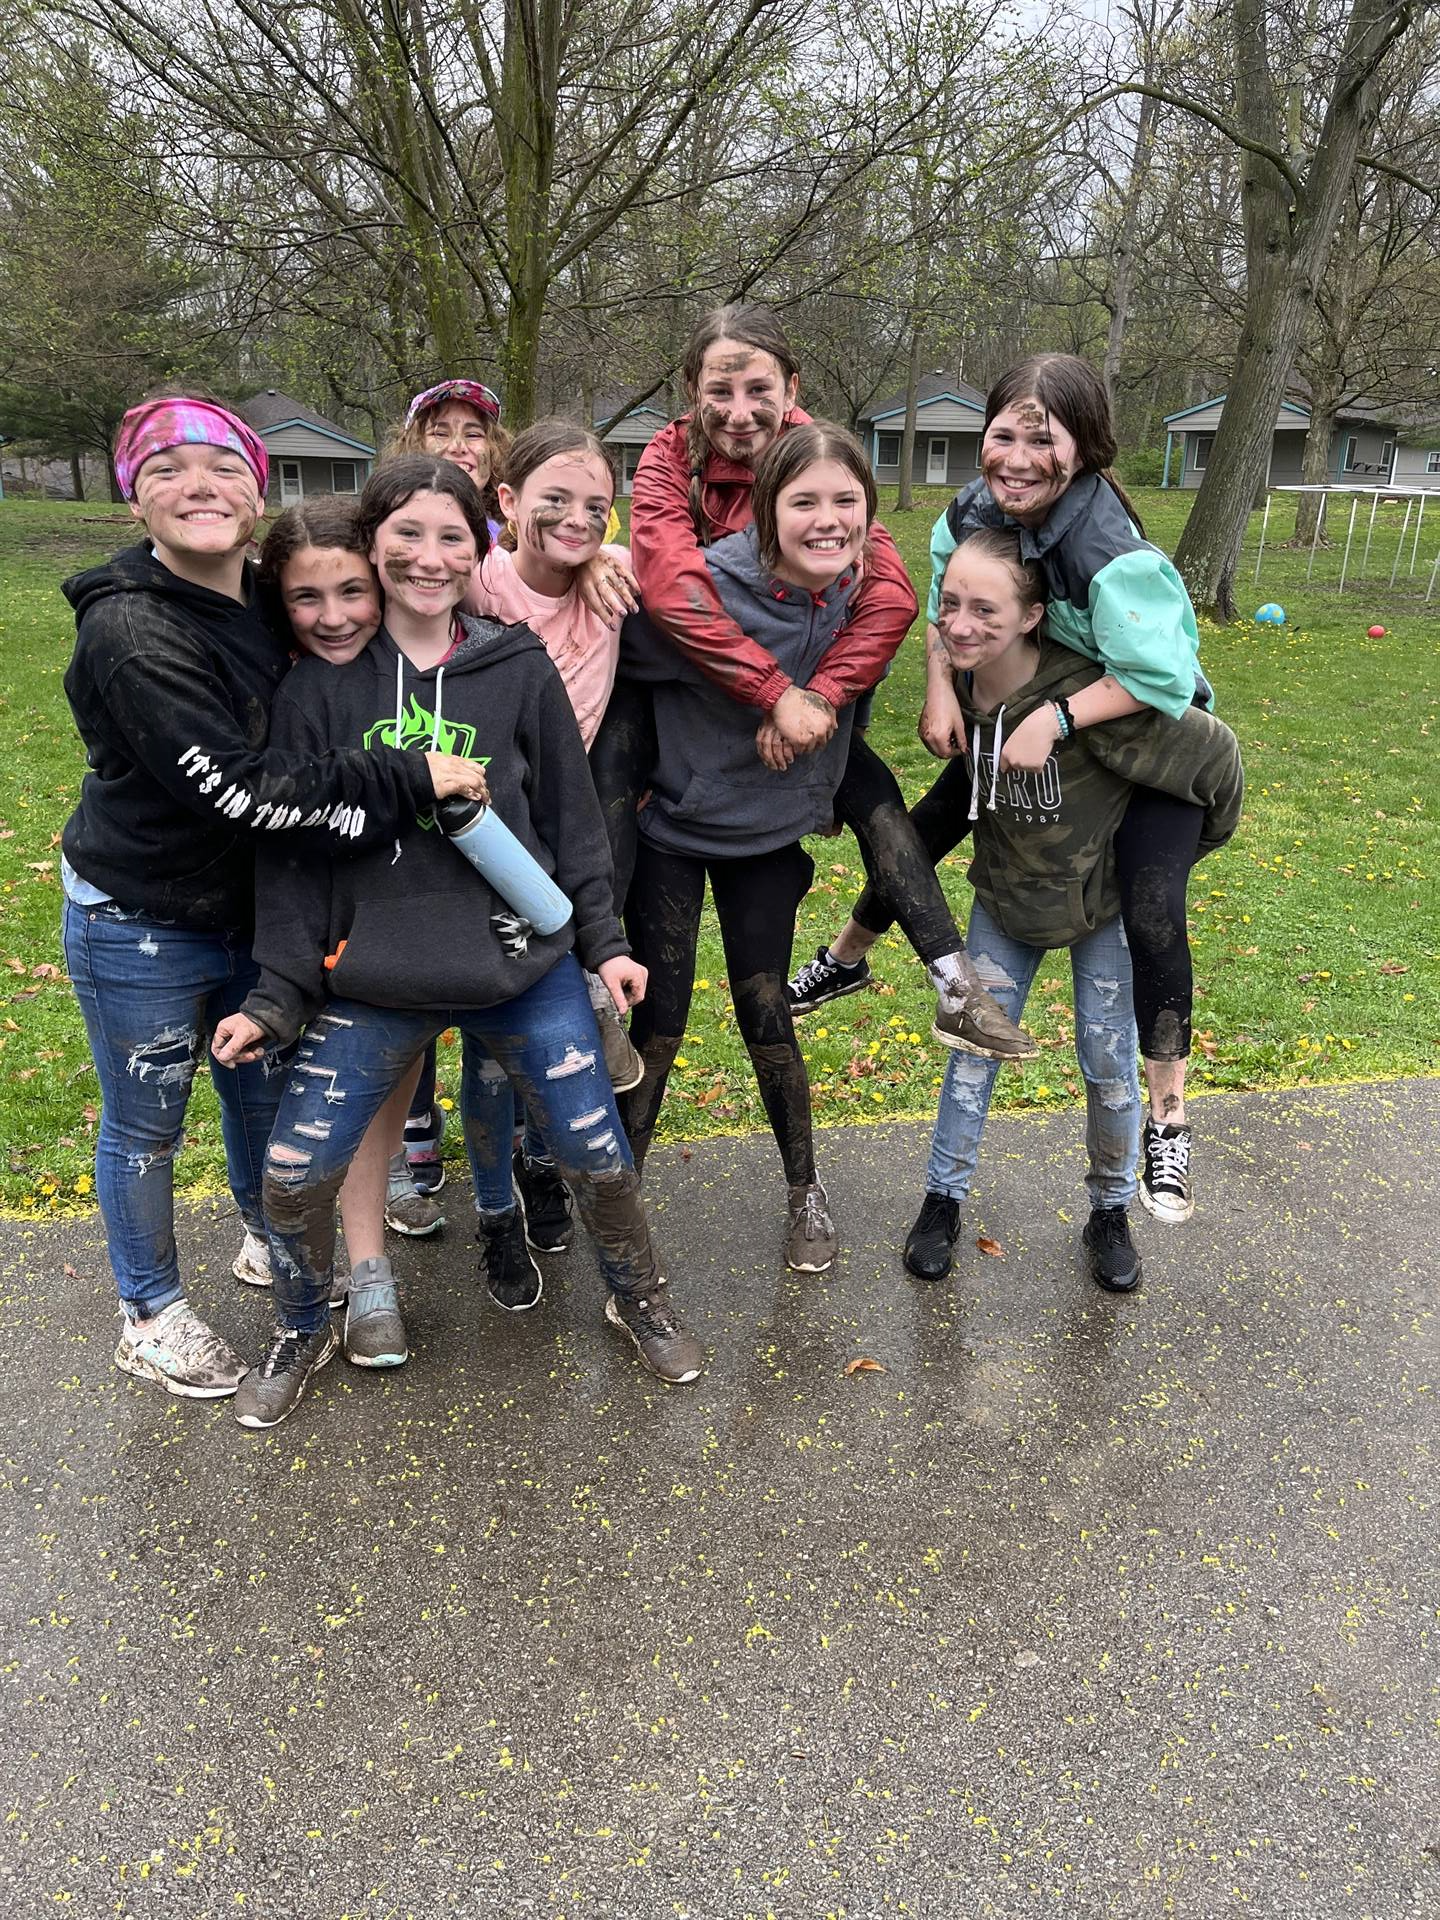 Students on a wet day at camp willson